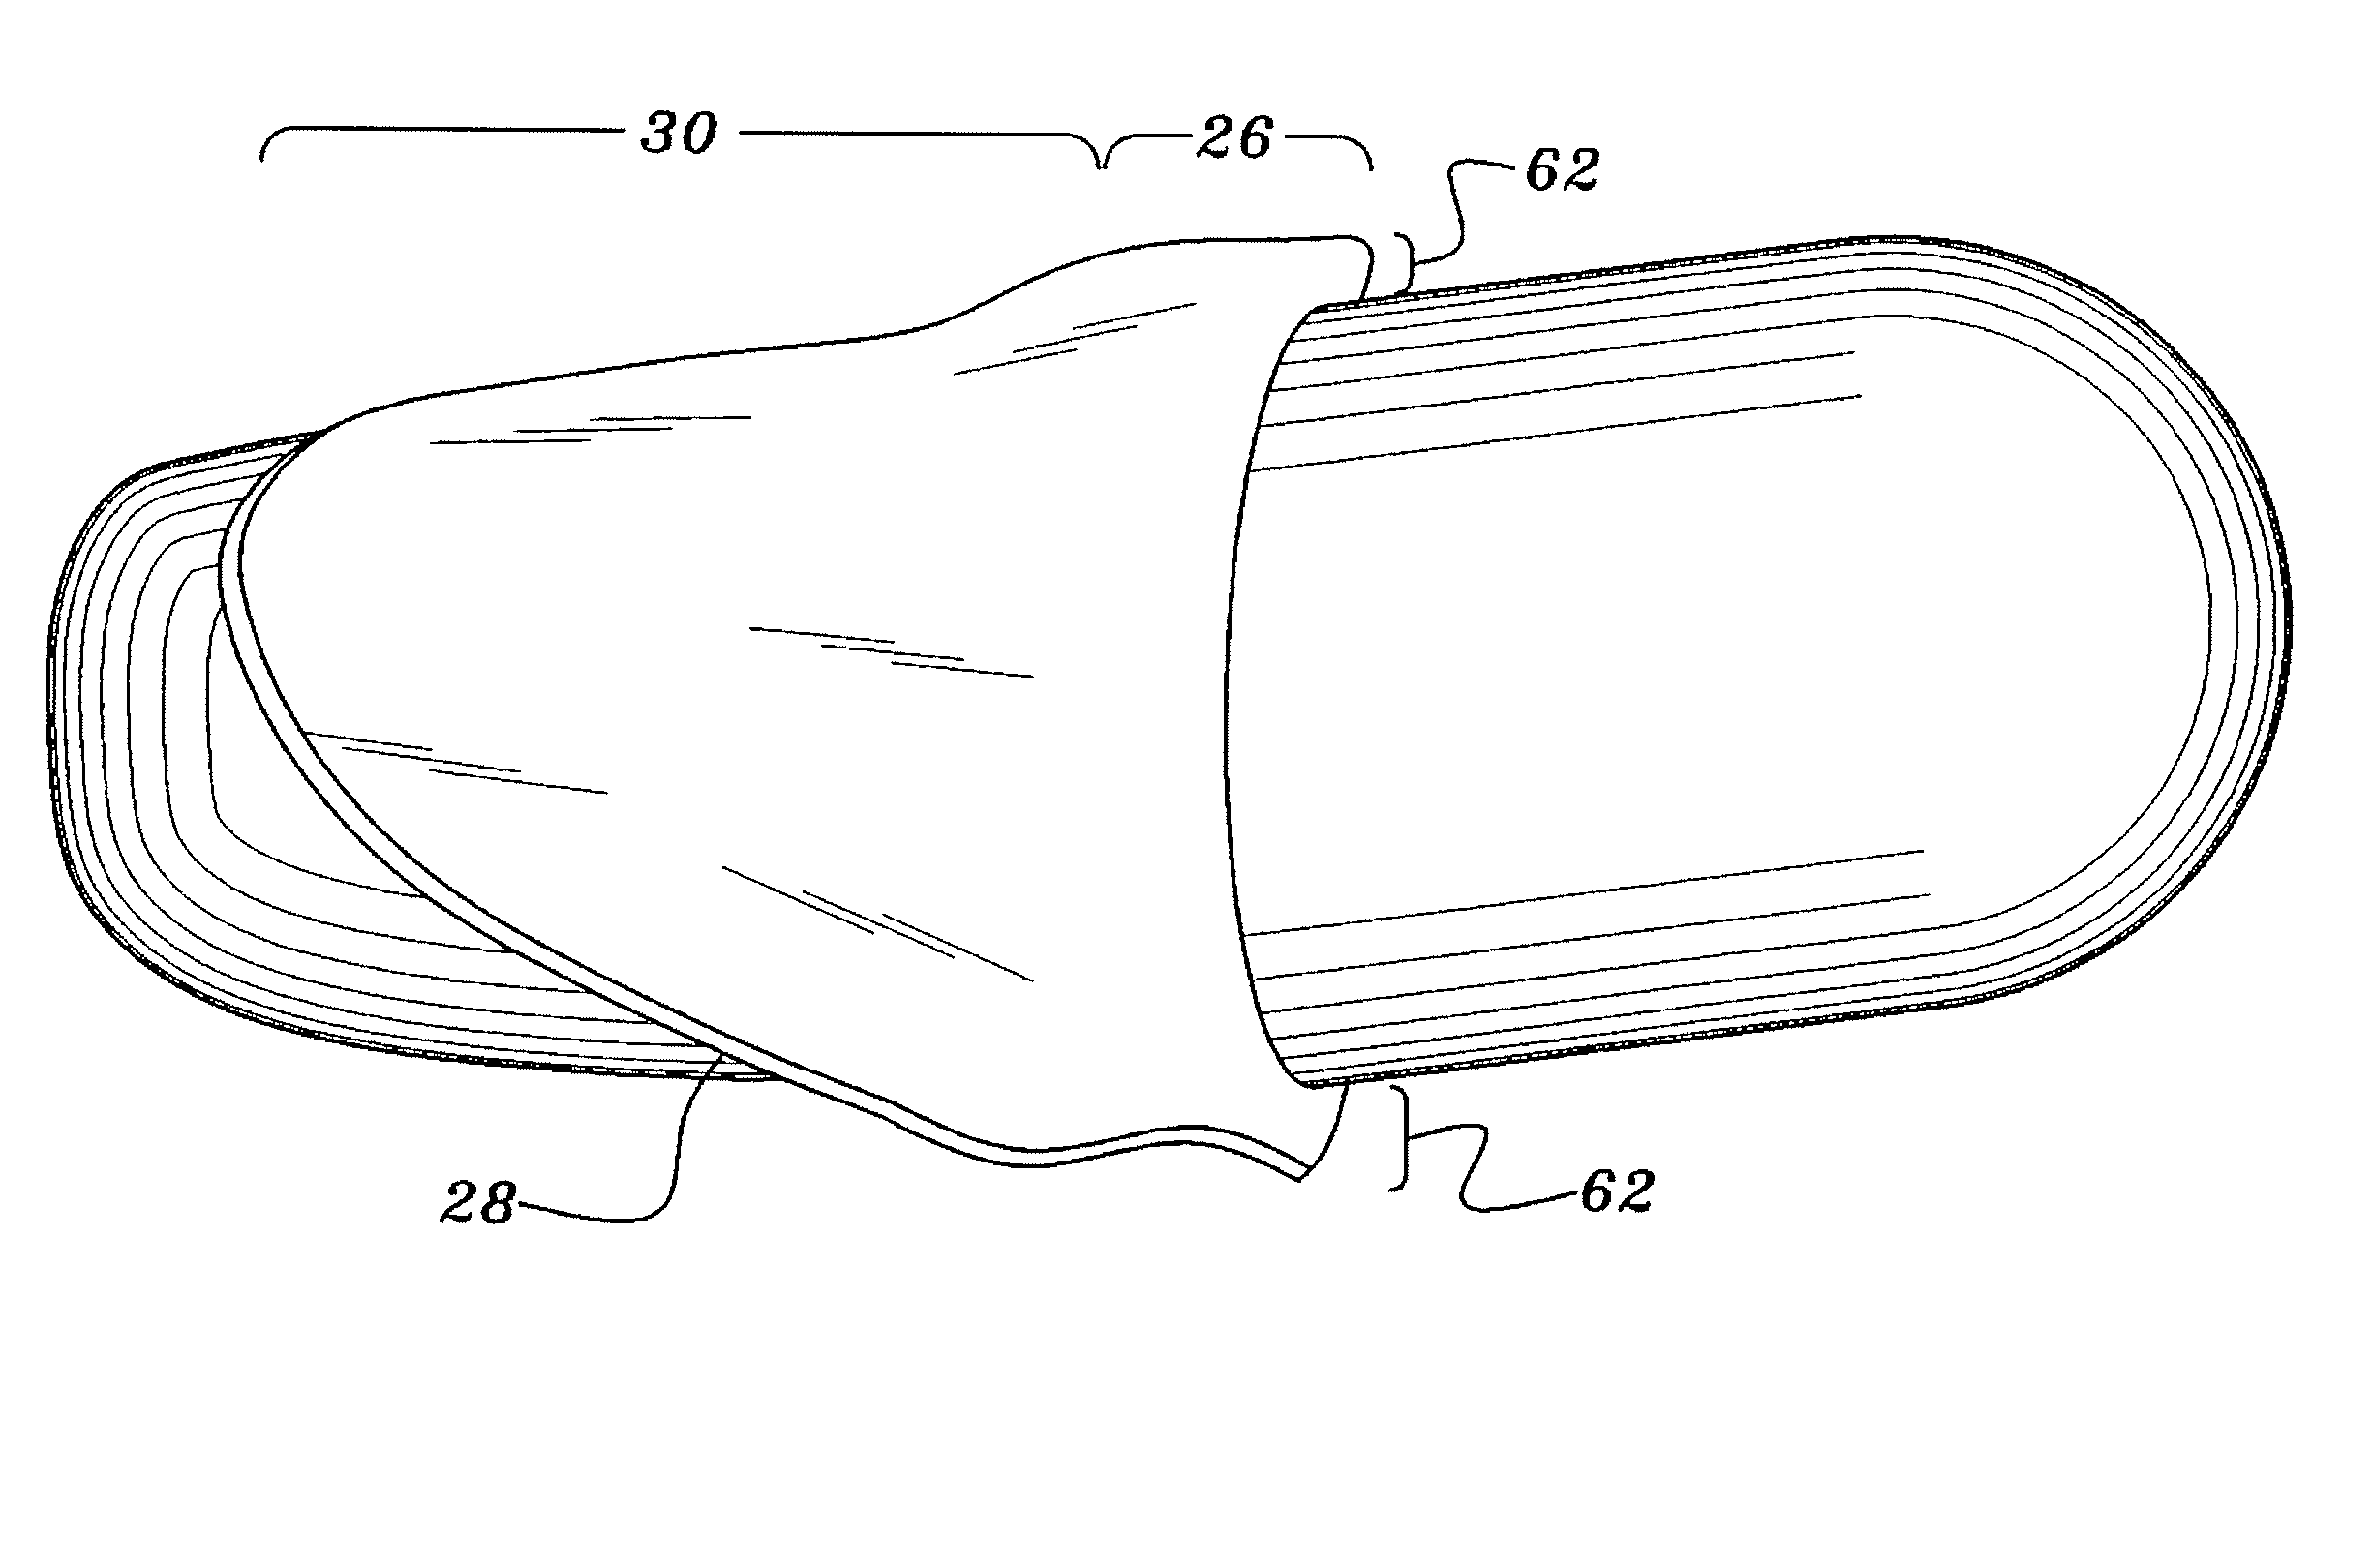 Bicuspid vascular valve and methods for making and implanting same